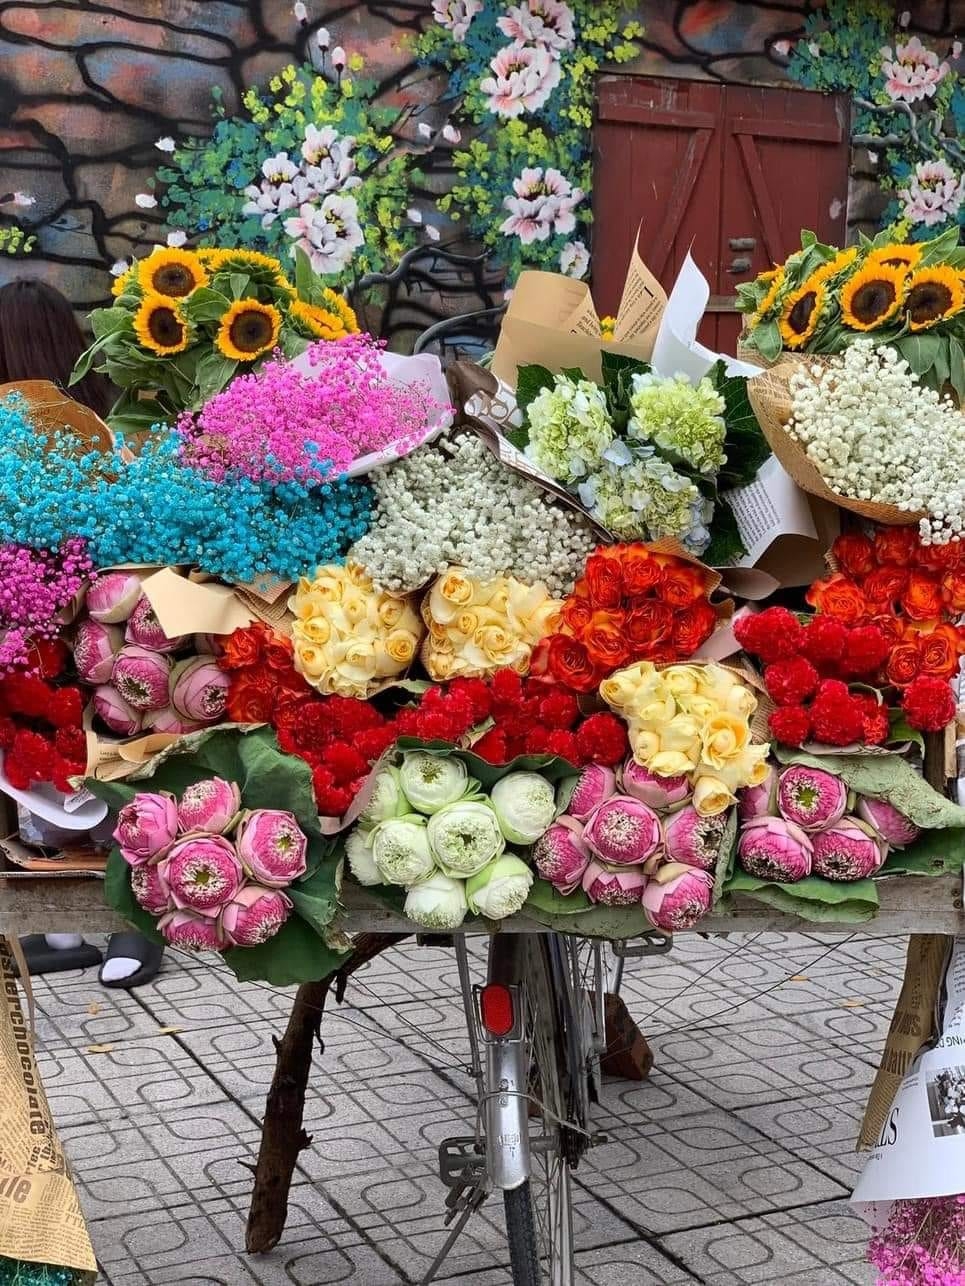 Young people in trend of check-in with flower bike on the streets